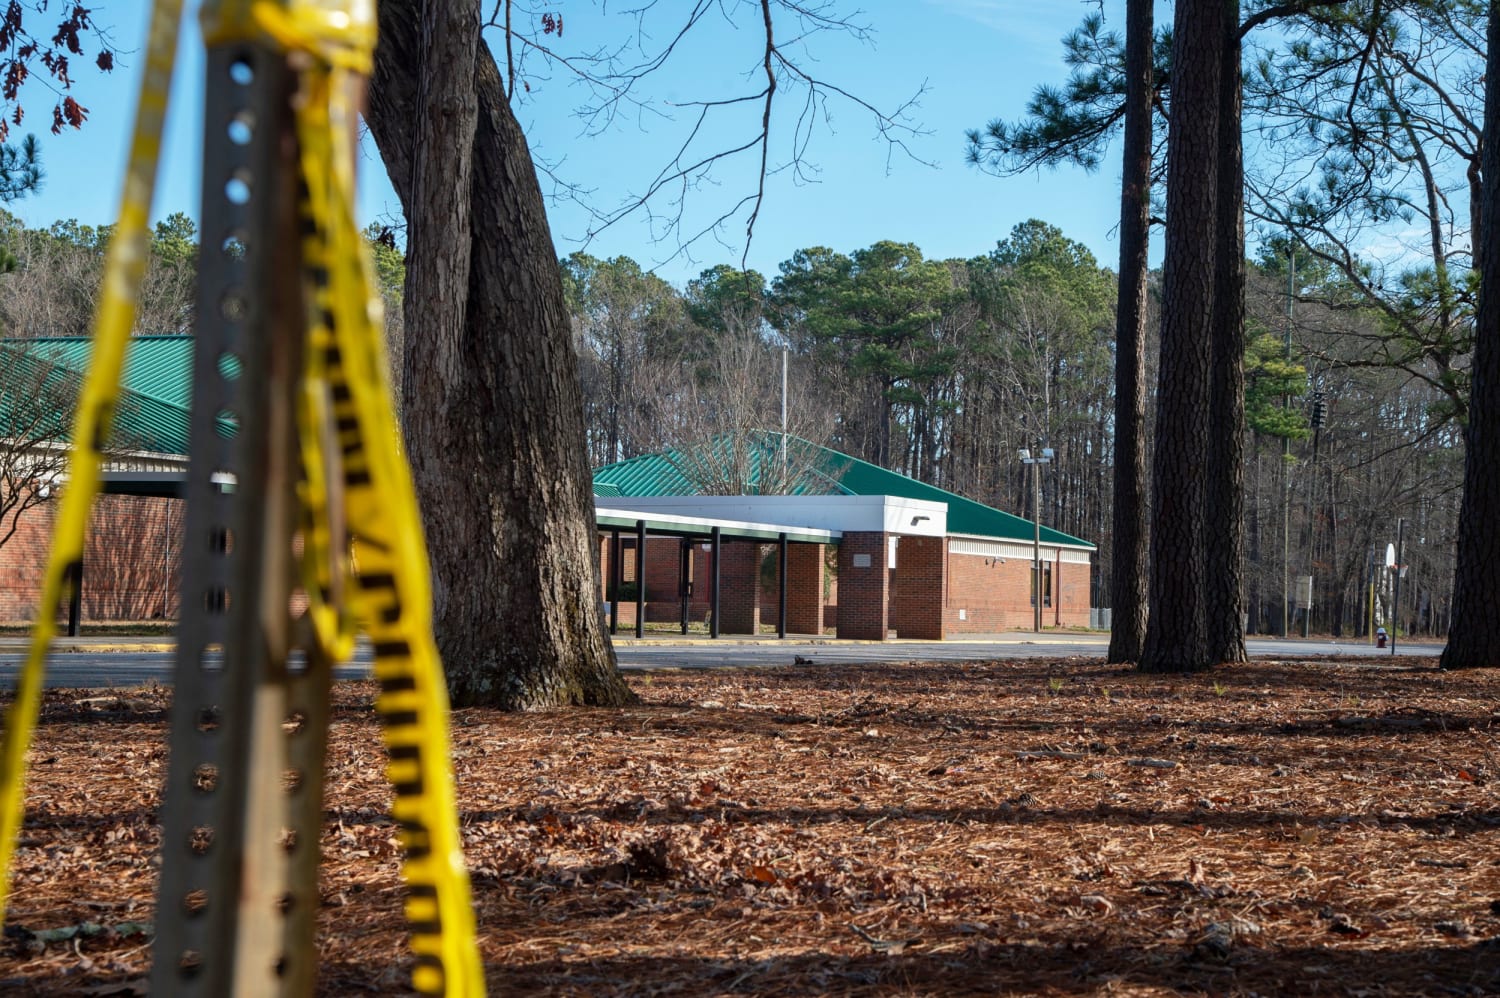 Family of 6-year-old Virginia boy who shot first-grade teacher says firearm was secured